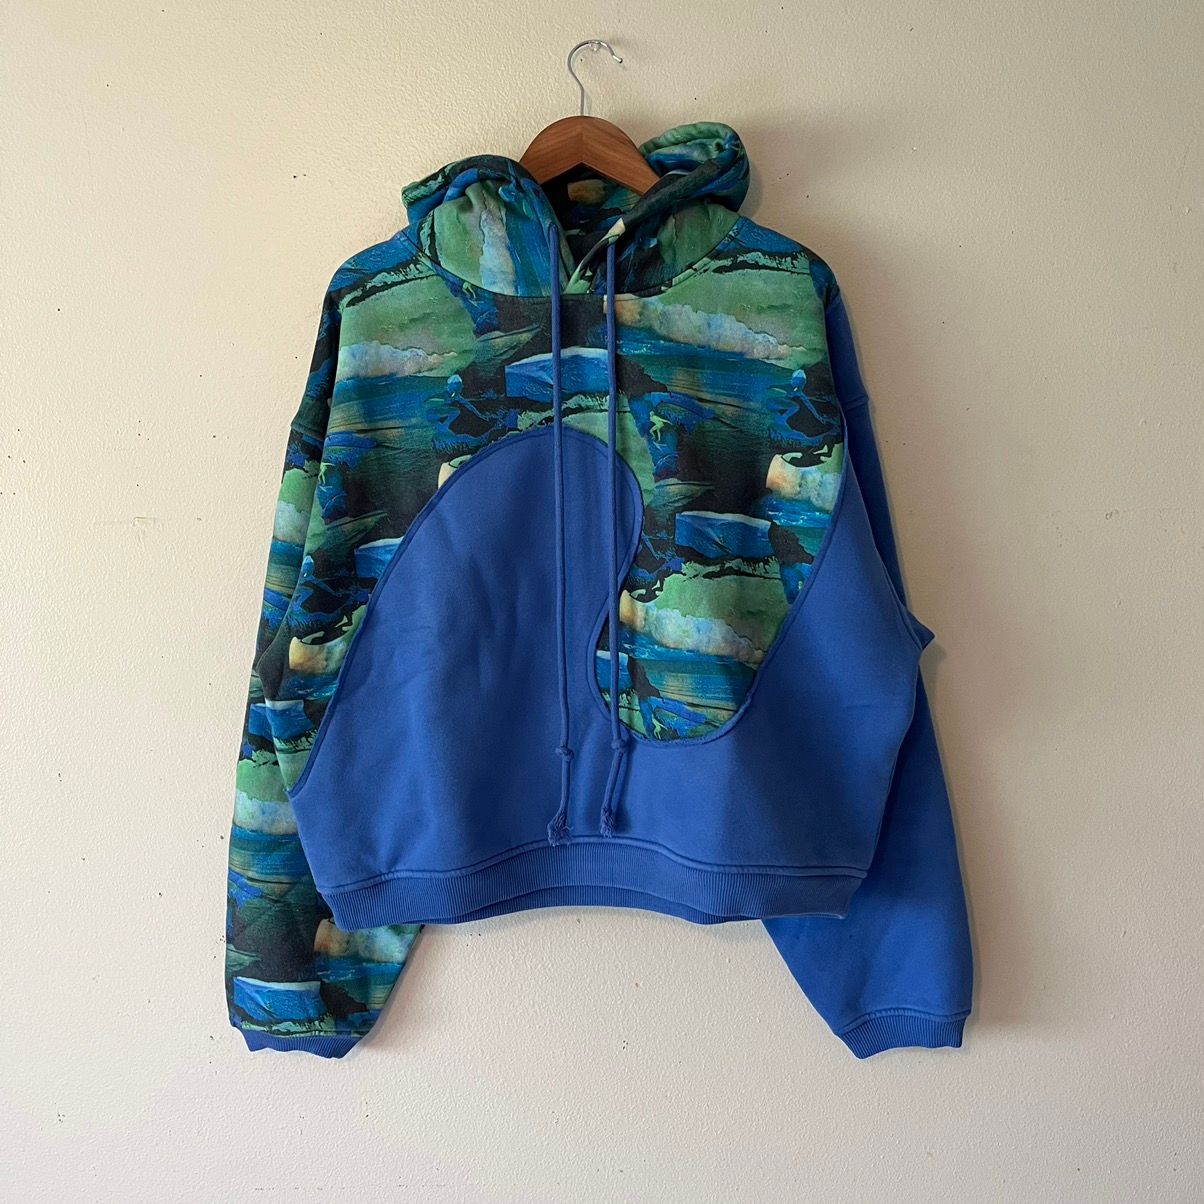 Erl Swirl Hoodie Sweatshirt in Null, Men's (Size Large) Product Image